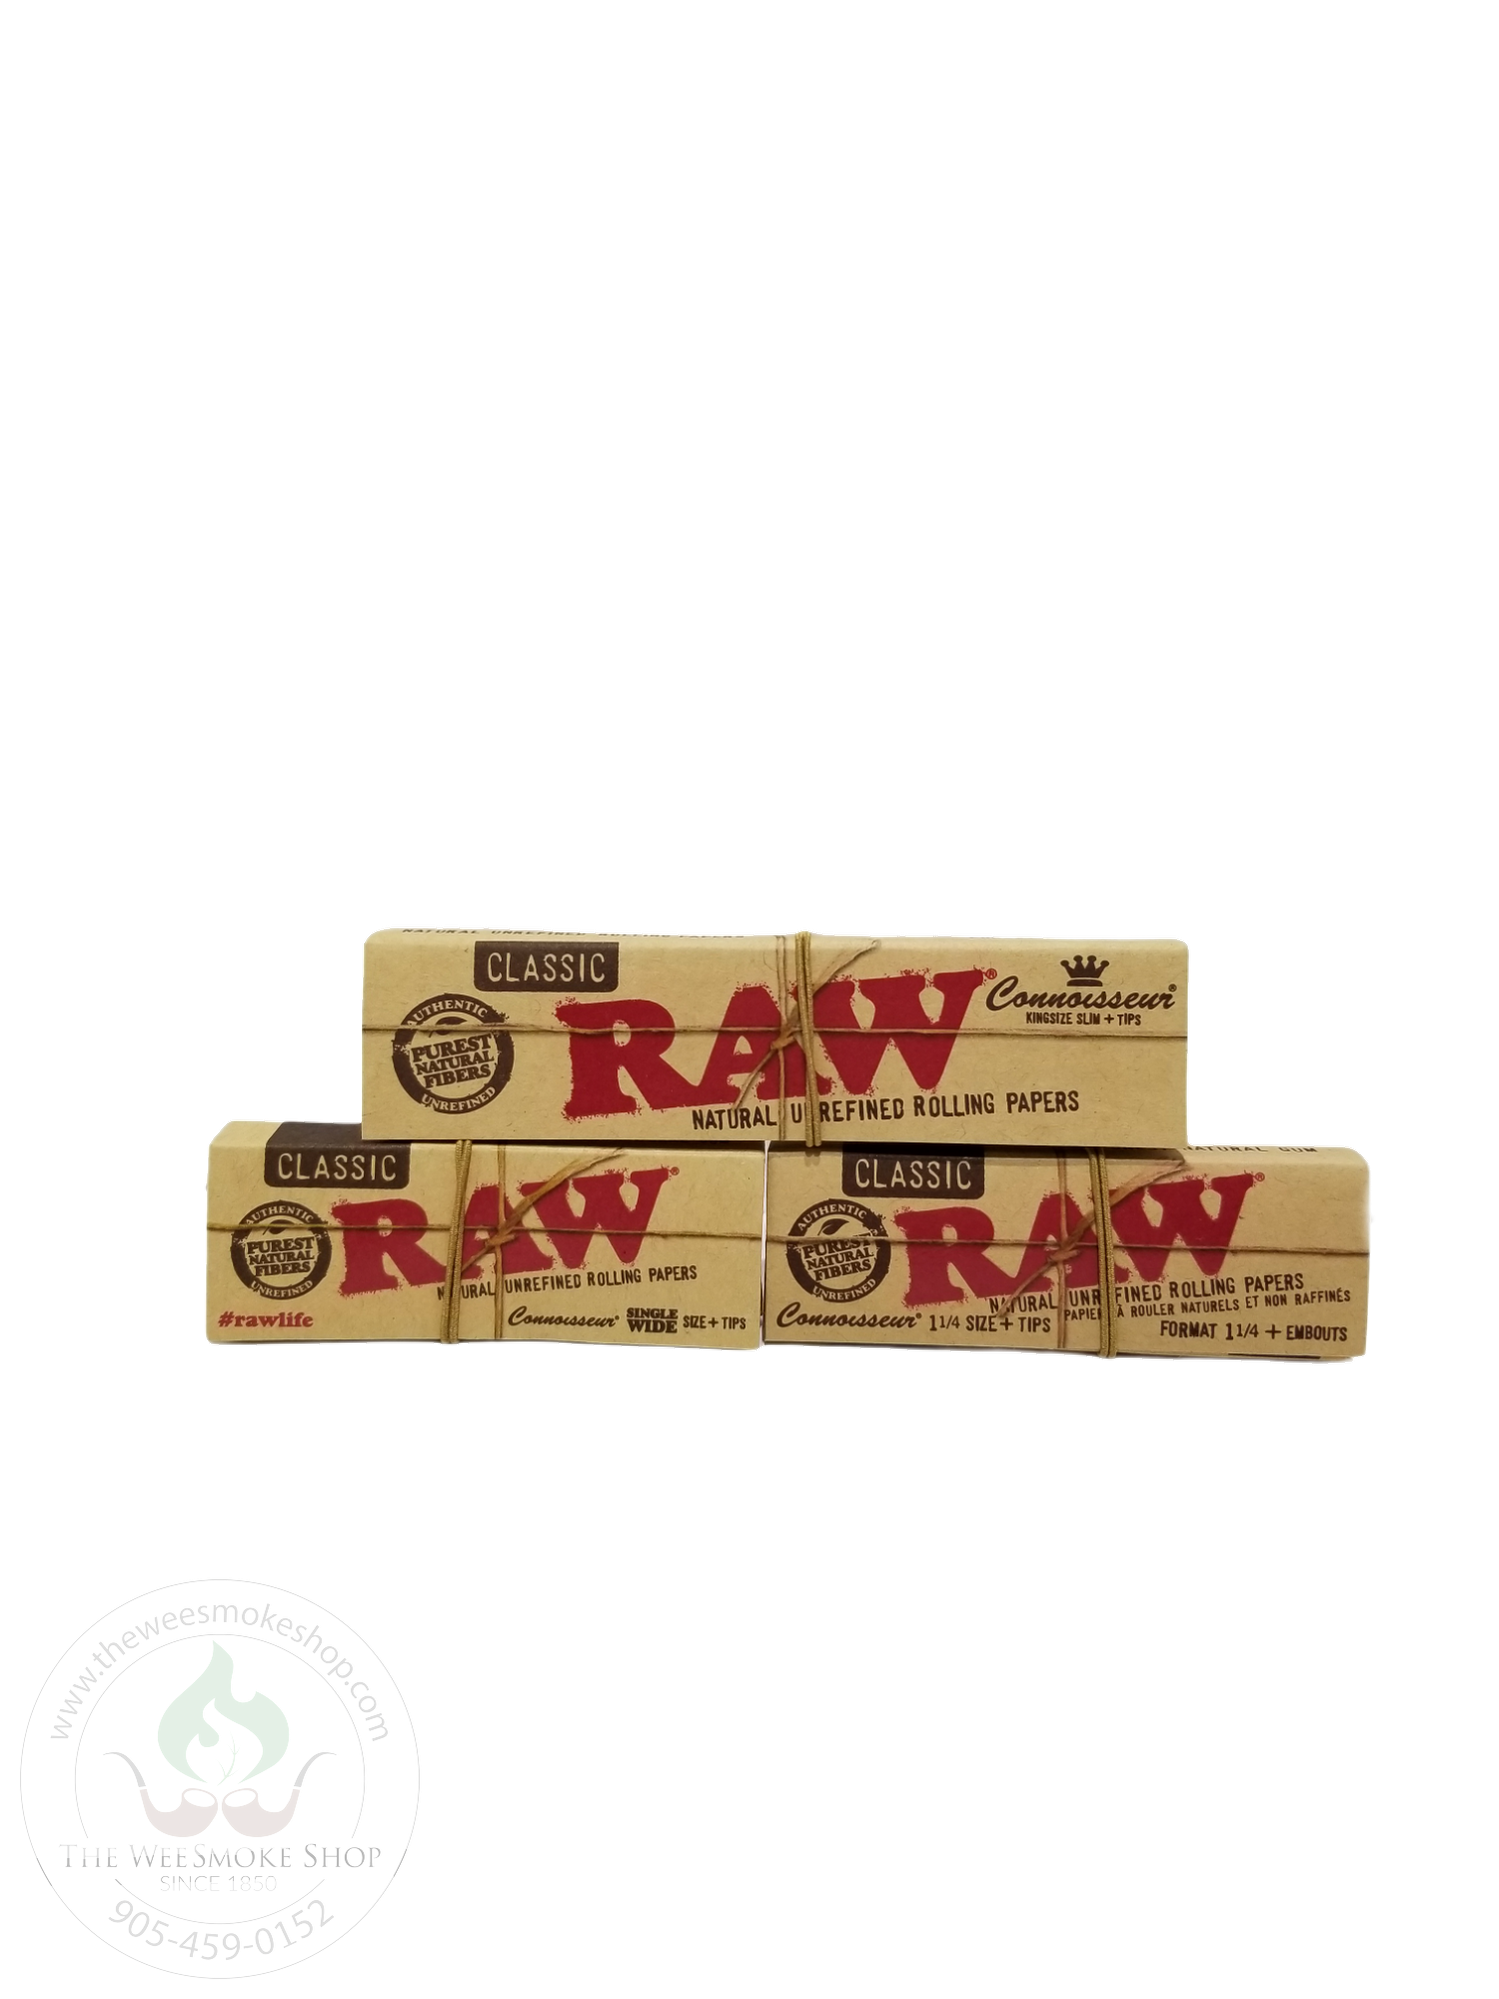 RAW Classic Connoisseur Papers + Tips-rolling papers-The Wee Smoke Shop